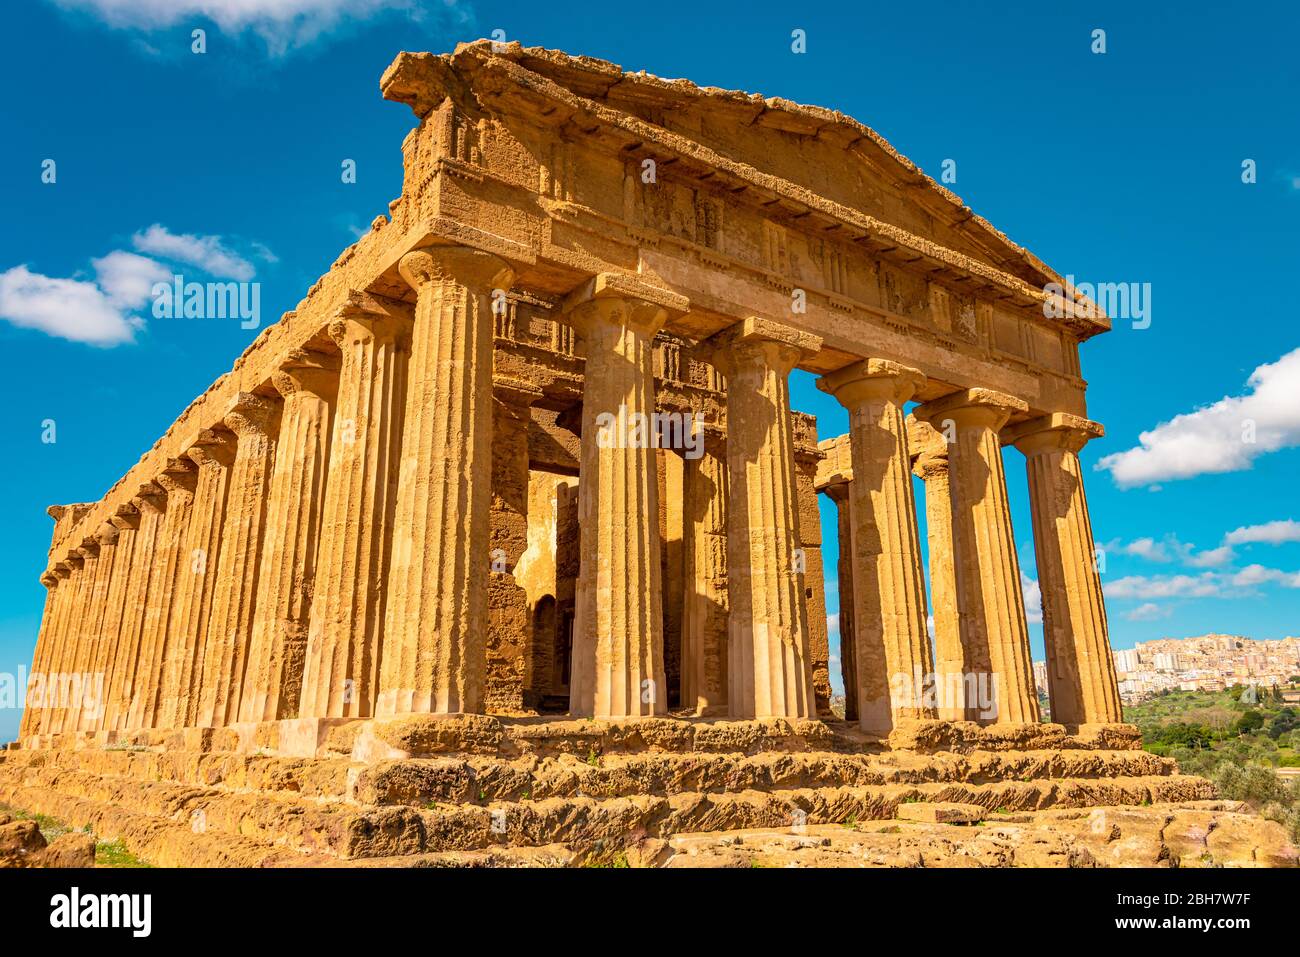 Valle dei Templi(Valley of the Temples) is an archeological site with ruins from Ancient Greece, situated in the Sicilian region of Agrigento, Sicily Stock Photo